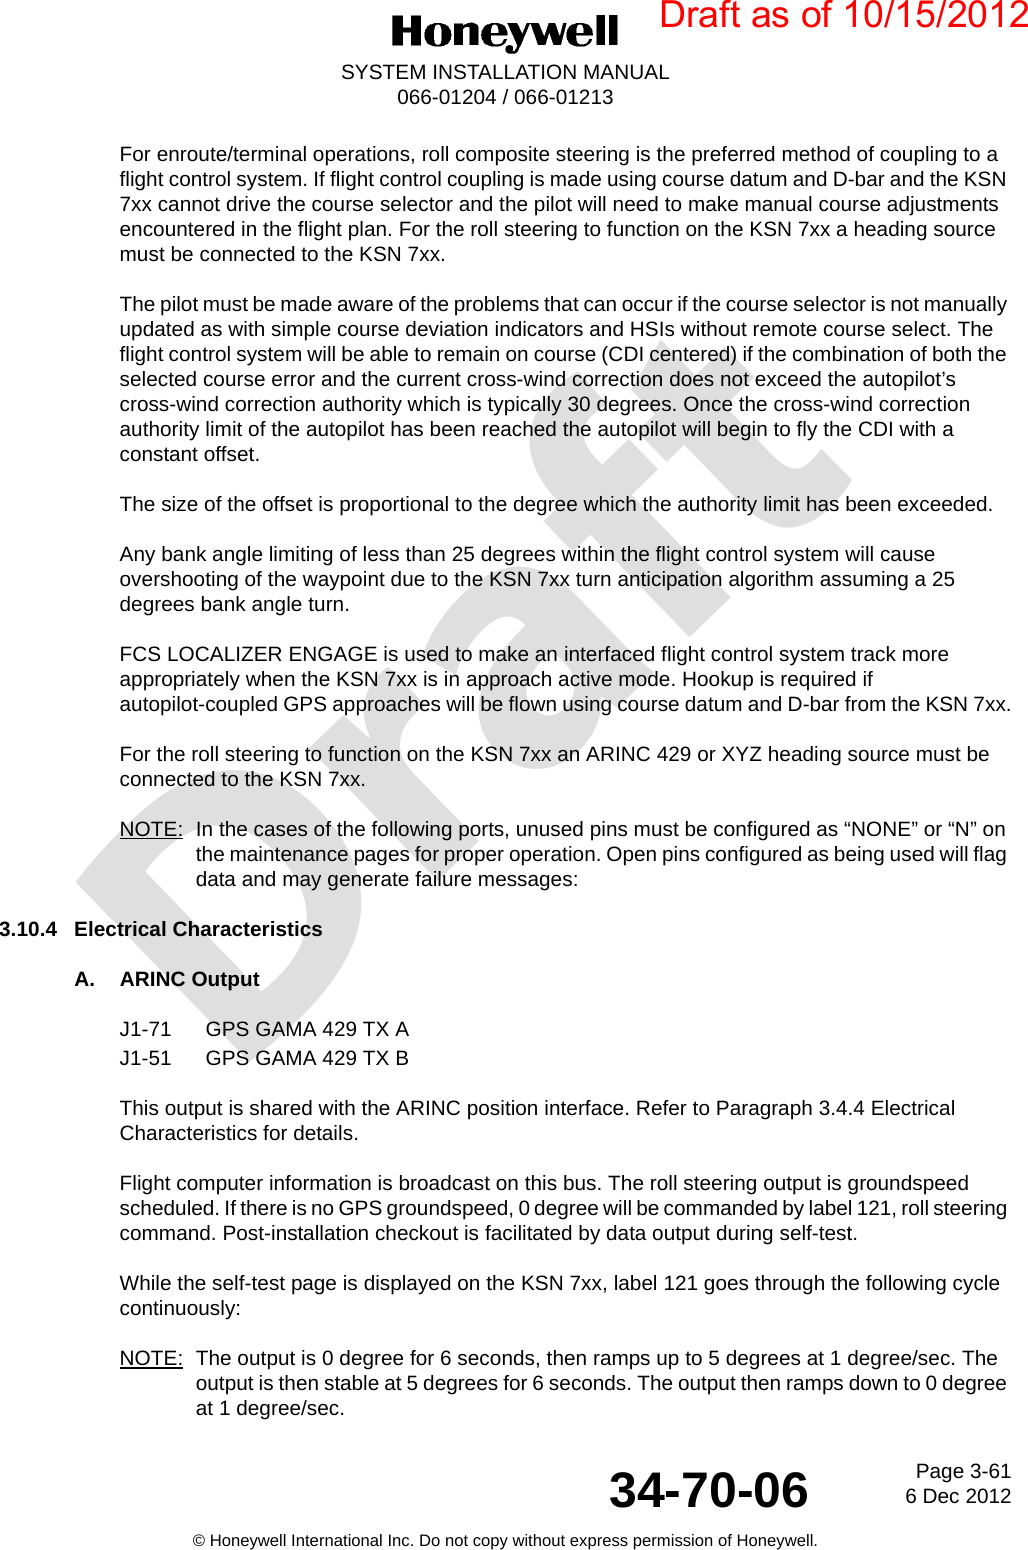 DraftPage 3-616 Dec 201234-70-06SYSTEM INSTALLATION MANUAL066-01204 / 066-01213© Honeywell International Inc. Do not copy without express permission of Honeywell.For enroute/terminal operations, roll composite steering is the preferred method of coupling to a flight control system. If flight control coupling is made using course datum and D-bar and the KSN 7xx cannot drive the course selector and the pilot will need to make manual course adjustments encountered in the flight plan. For the roll steering to function on the KSN 7xx a heading source must be connected to the KSN 7xx.The pilot must be made aware of the problems that can occur if the course selector is not manually updated as with simple course deviation indicators and HSIs without remote course select. The flight control system will be able to remain on course (CDI centered) if the combination of both the selected course error and the current cross-wind correction does not exceed the autopilot’s cross-wind correction authority which is typically 30 degrees. Once the cross-wind correction authority limit of the autopilot has been reached the autopilot will begin to fly the CDI with a constant offset.The size of the offset is proportional to the degree which the authority limit has been exceeded.Any bank angle limiting of less than 25 degrees within the flight control system will cause overshooting of the waypoint due to the KSN 7xx turn anticipation algorithm assuming a 25 degrees bank angle turn.FCS LOCALIZER ENGAGE is used to make an interfaced flight control system track more appropriately when the KSN 7xx is in approach active mode. Hookup is required if autopilot-coupled GPS approaches will be flown using course datum and D-bar from the KSN 7xx.For the roll steering to function on the KSN 7xx an ARINC 429 or XYZ heading source must be connected to the KSN 7xx.NOTE: In the cases of the following ports, unused pins must be configured as “NONE” or “N” on the maintenance pages for proper operation. Open pins configured as being used will flag data and may generate failure messages:3.10.4 Electrical CharacteristicsA. ARINC OutputJ1-71 GPS GAMA 429 TX AJ1-51 GPS GAMA 429 TX BThis output is shared with the ARINC position interface. Refer to Paragraph 3.4.4 Electrical Characteristics for details.Flight computer information is broadcast on this bus. The roll steering output is groundspeed scheduled. If there is no GPS groundspeed, 0 degree will be commanded by label 121, roll steering command. Post-installation checkout is facilitated by data output during self-test.While the self-test page is displayed on the KSN 7xx, label 121 goes through the following cycle continuously:NOTE: The output is 0 degree for 6 seconds, then ramps up to 5 degrees at 1 degree/sec. The output is then stable at 5 degrees for 6 seconds. The output then ramps down to 0 degree at 1 degree/sec.Draft as of 10/15/2012